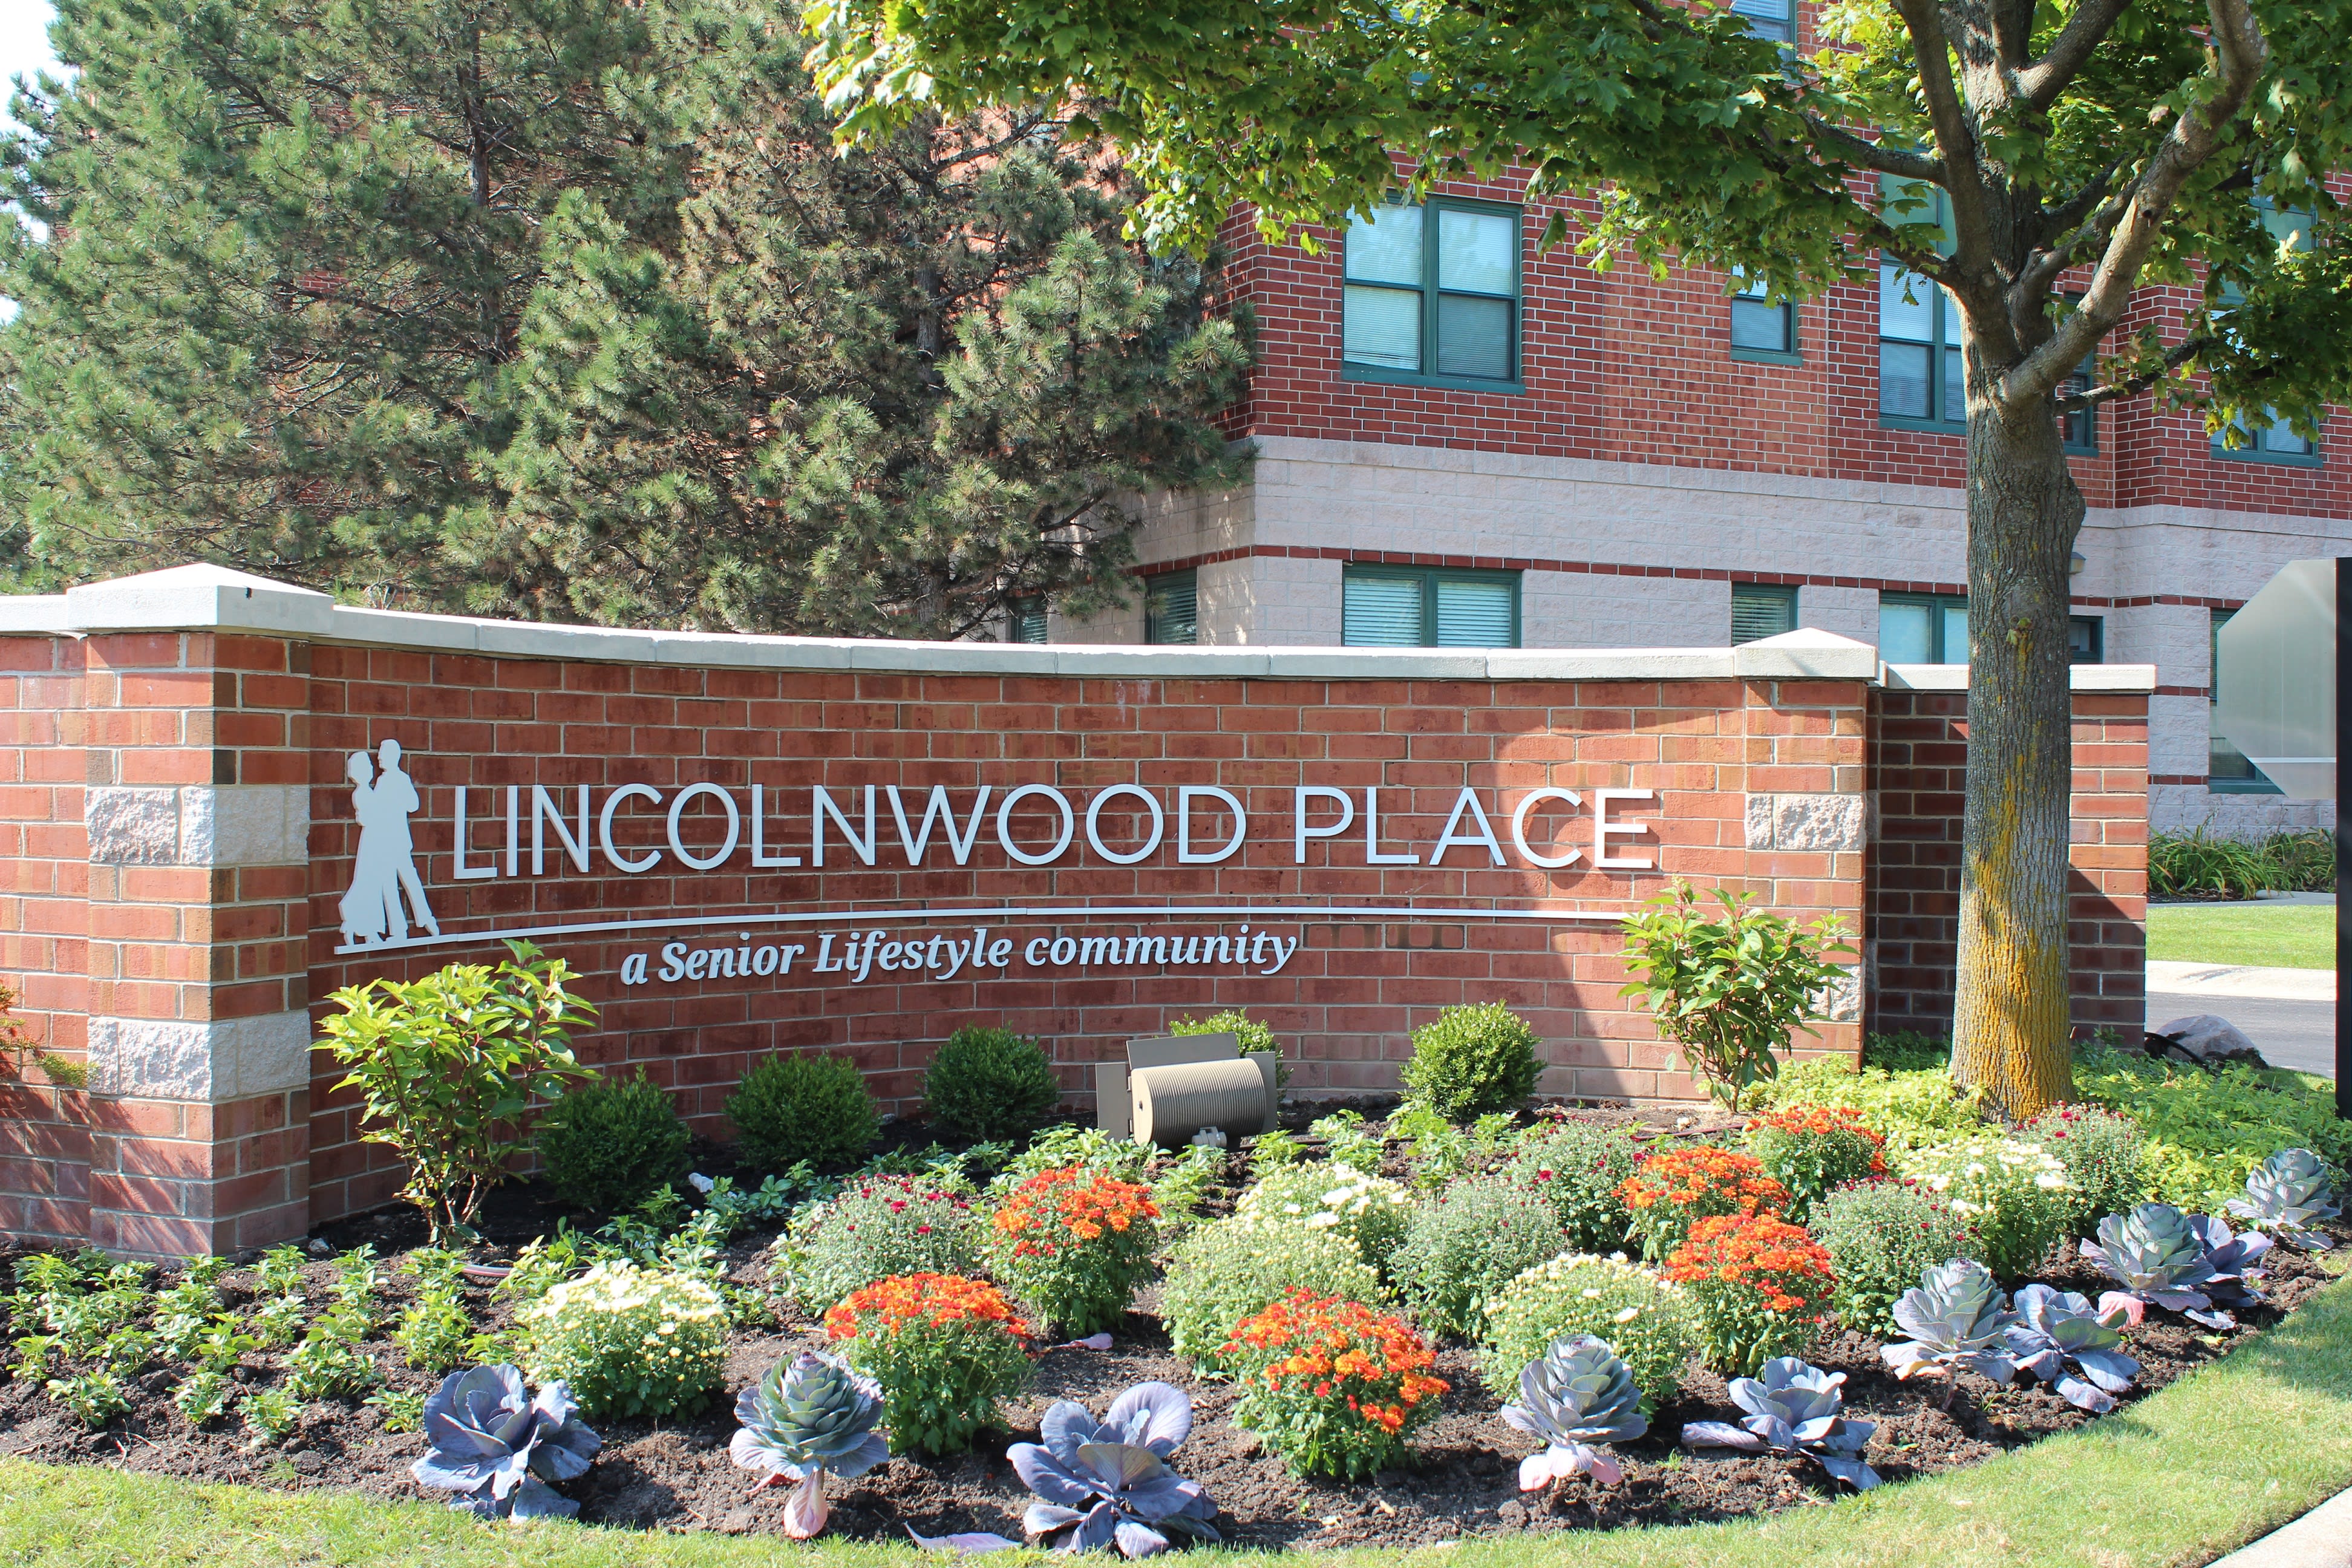 Lincolnwood Place community exterior